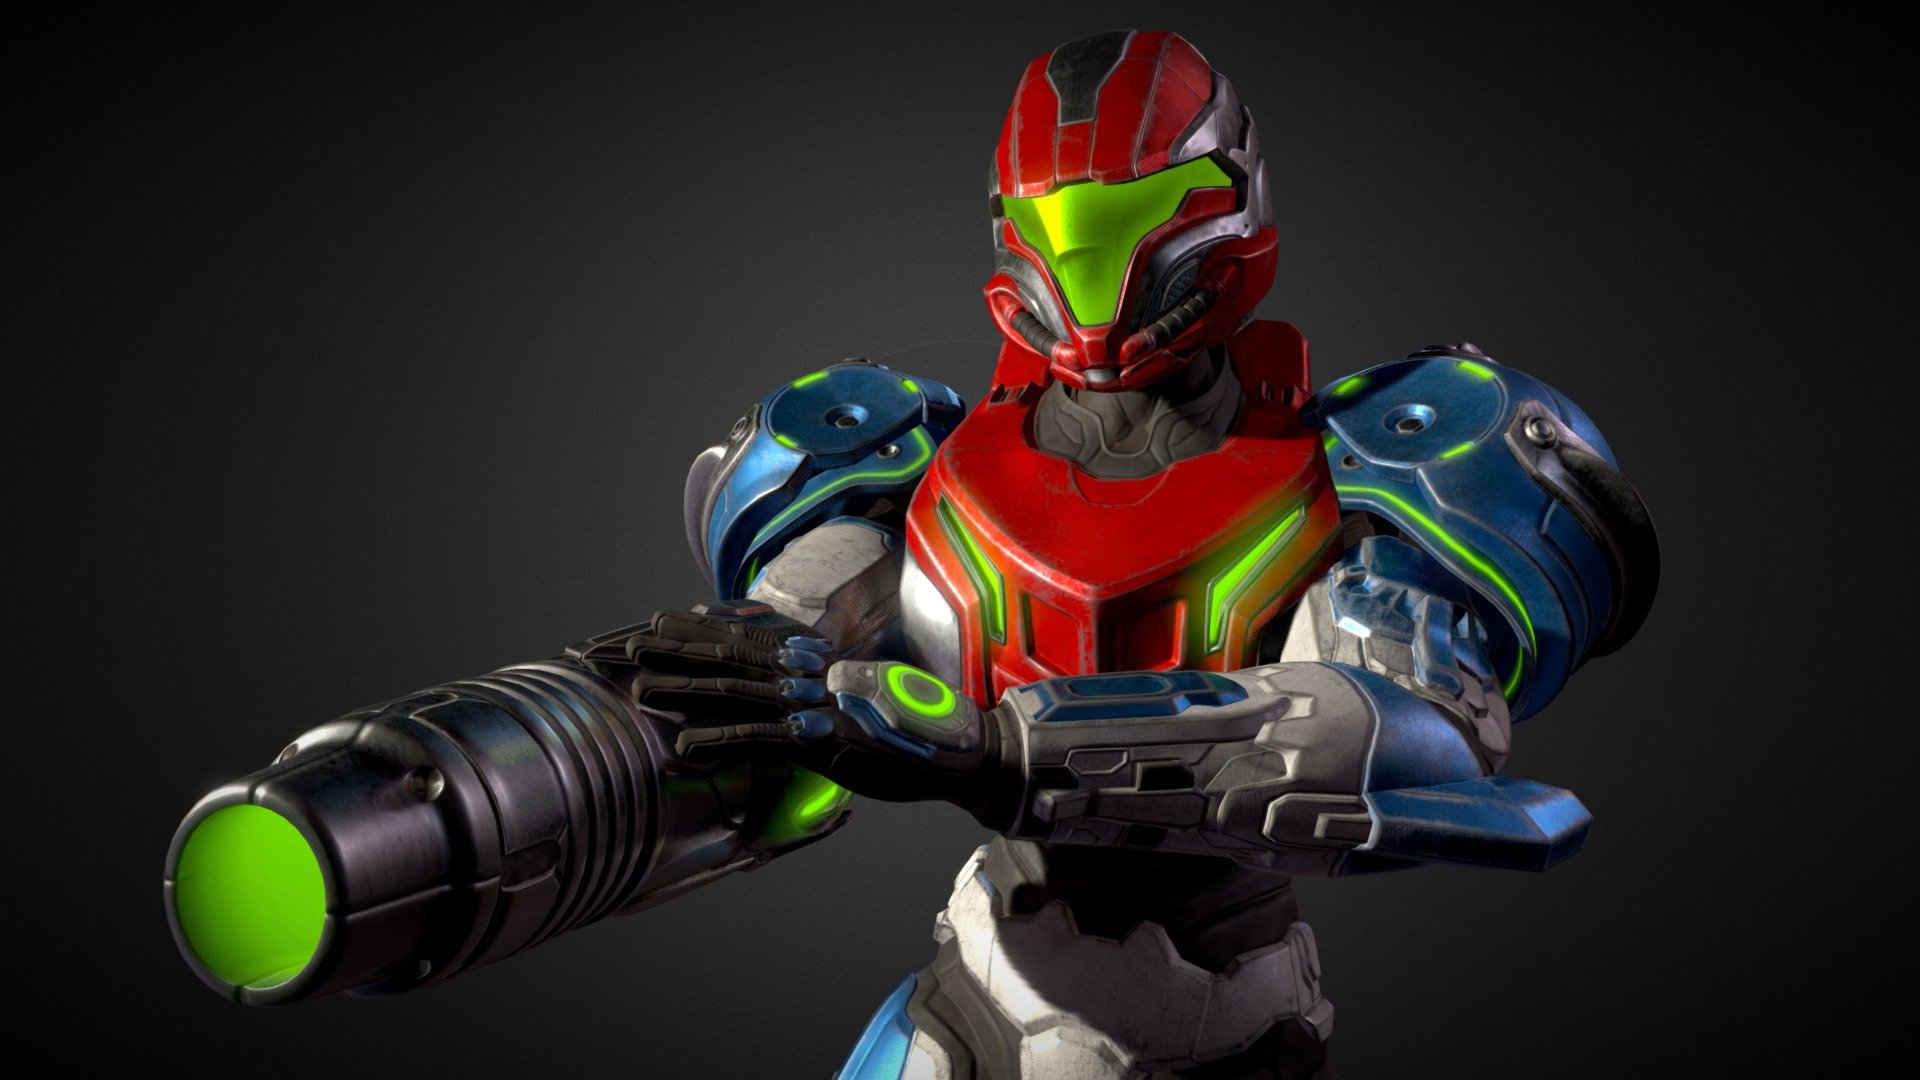 A reimagining of halo spartan armor designed for bounty hunter Samus Aran. After making contact with the UNSC and being inducted into their Spartan program, a new suit of mjolnir power armor was manufactured for Samus Aran, Spartan S435. A blue and red paint variation resembling her power armor used when exploring the planet ZDR 3d model